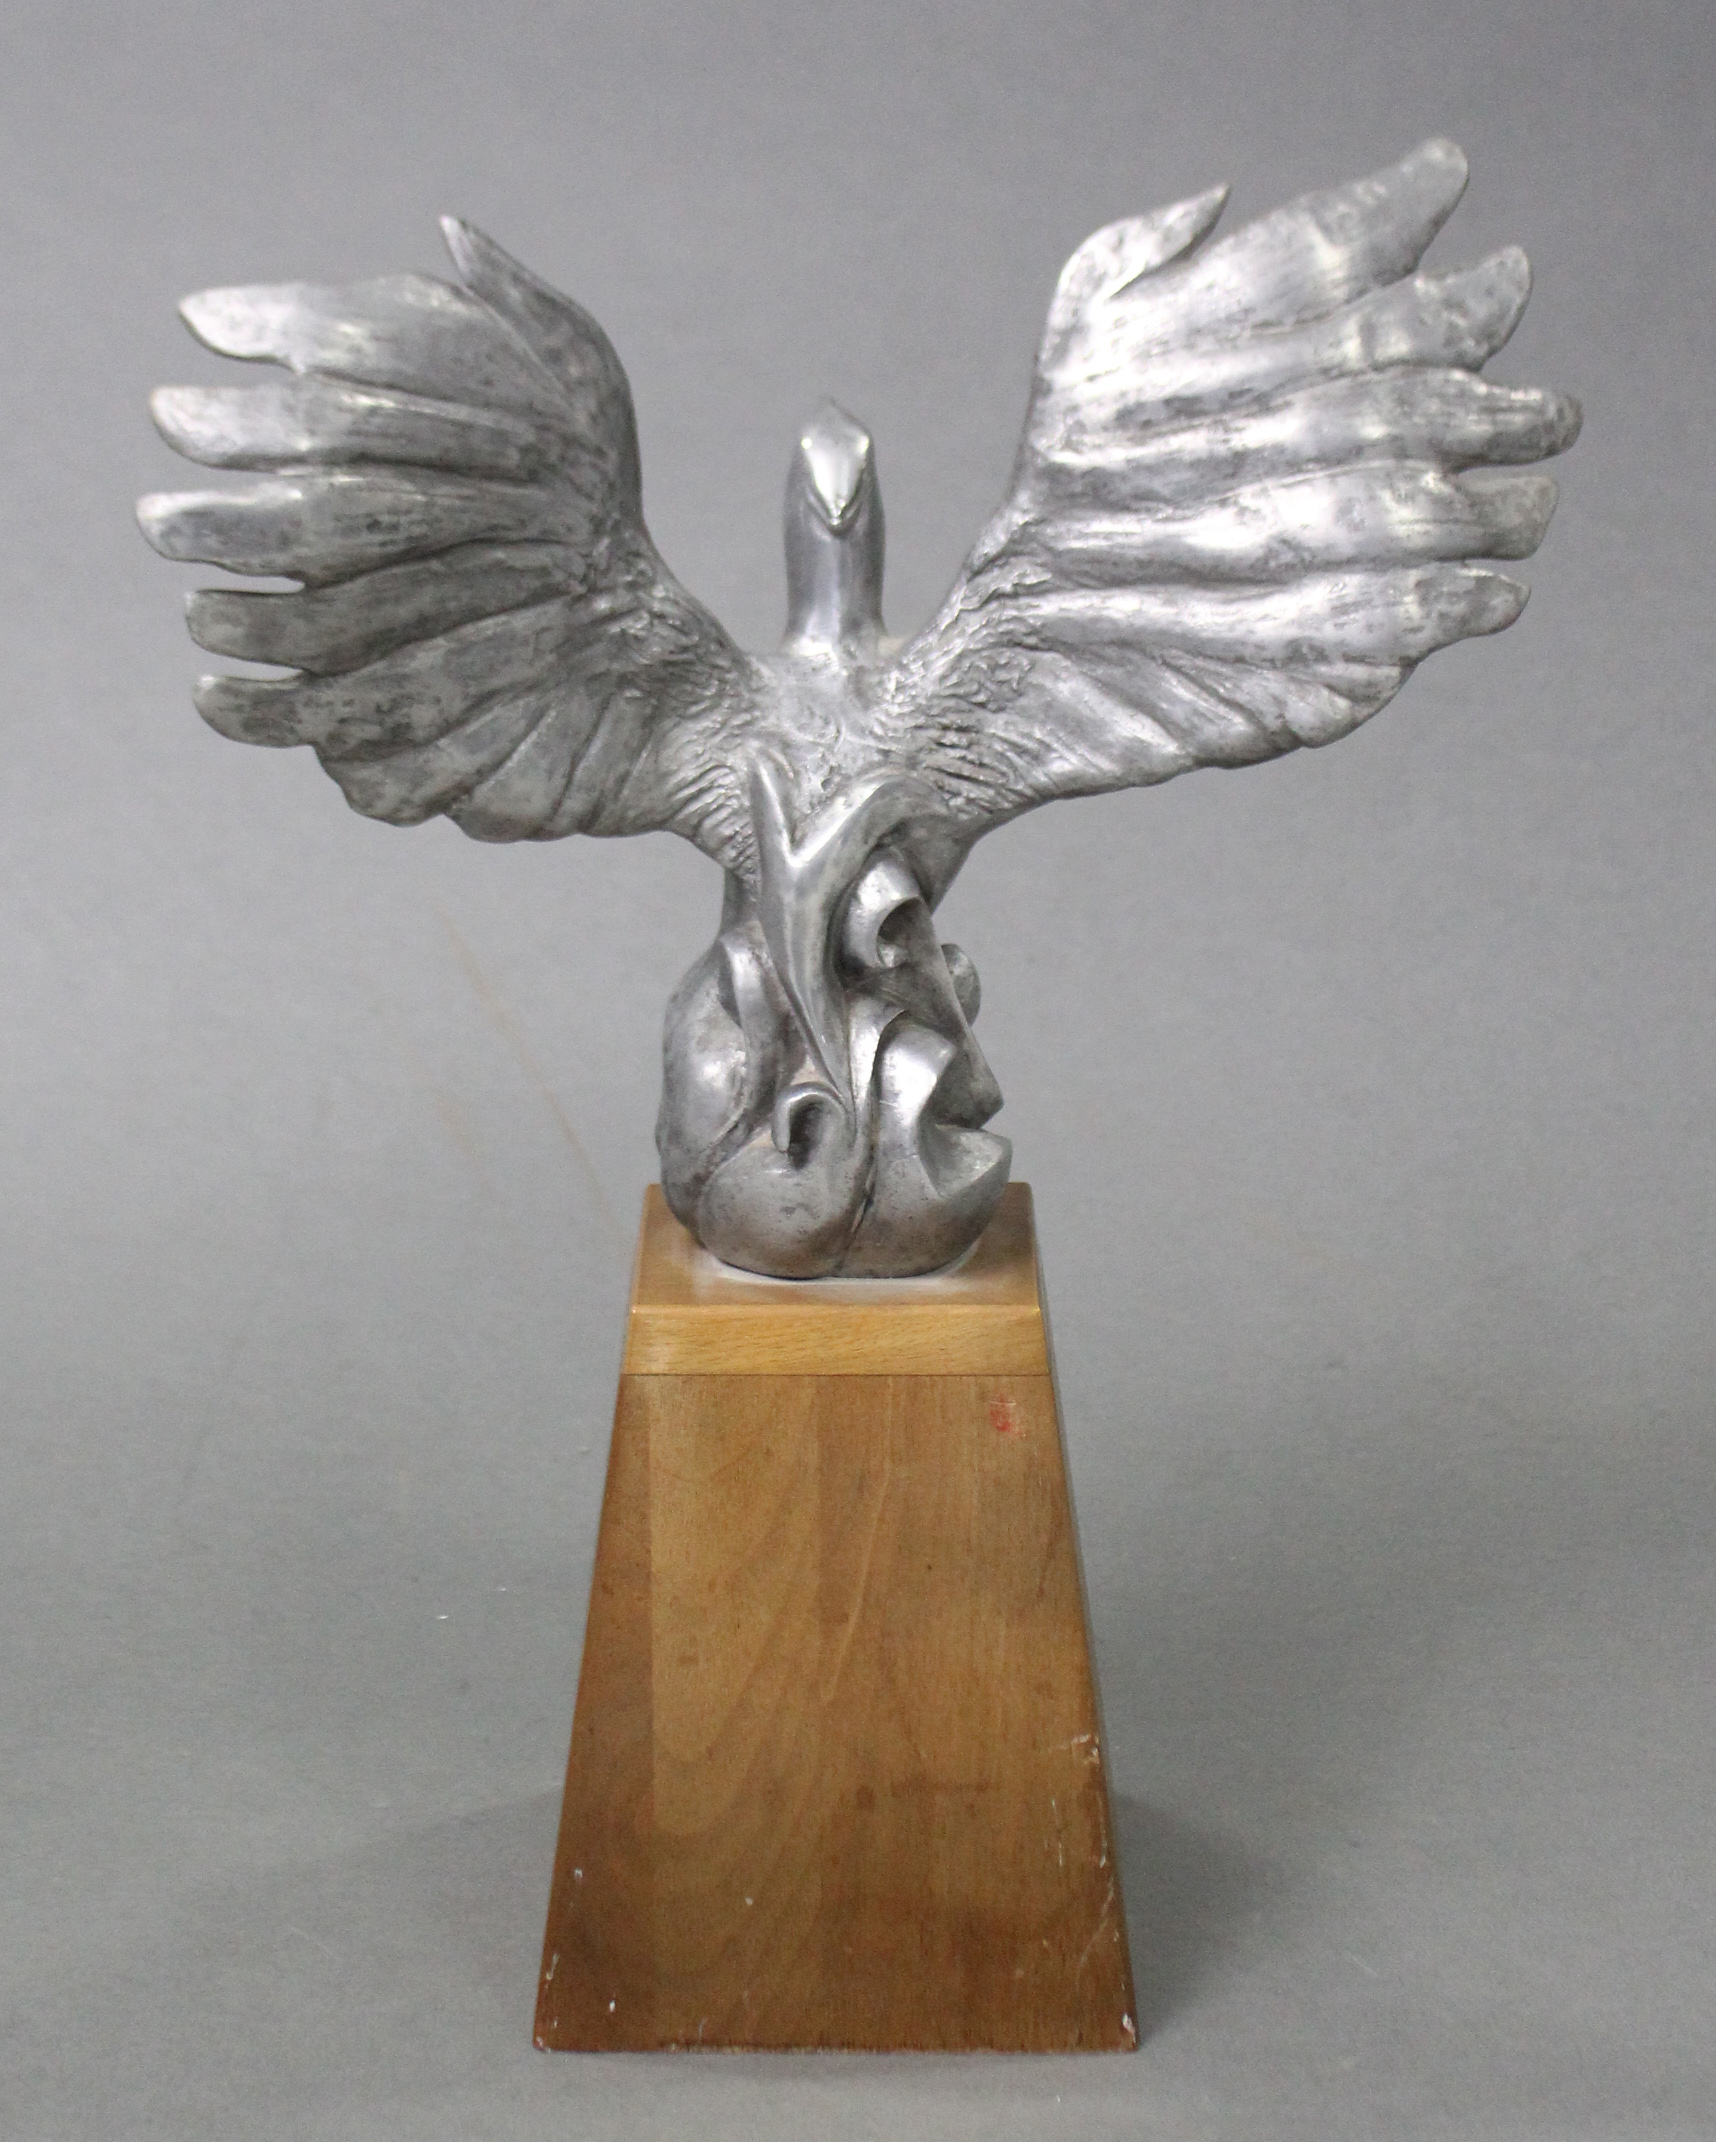 A cast alluminium model of a Phoenix, with wings spread, on tapered oblong wooden base, 17" high ove - Image 2 of 2